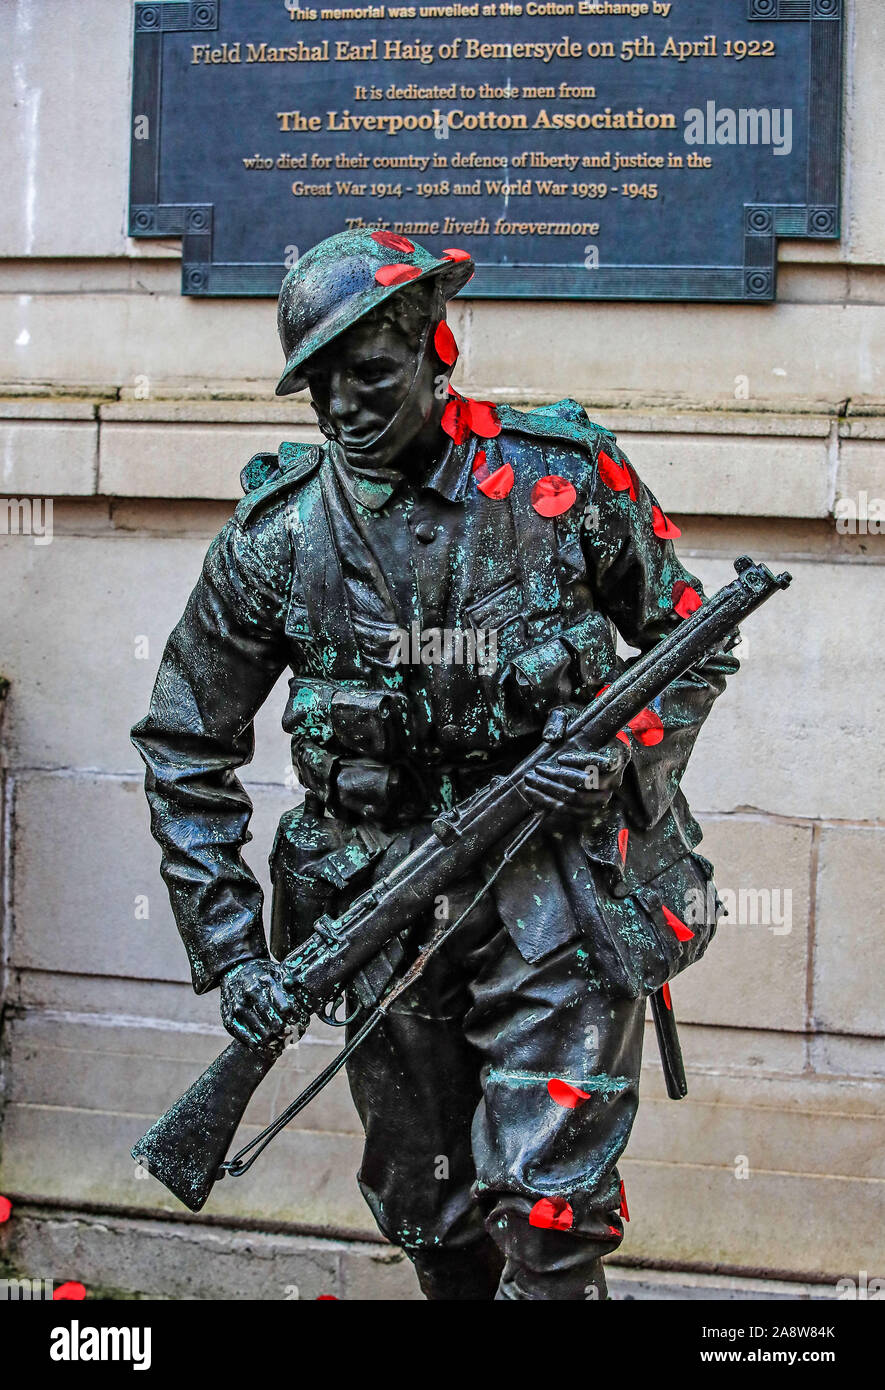 A statue of Field Marshal Earl Haig of Bemersyde is covered in poppy petals, as shoppers in Liverpool City Centre observe a silence to mark Armistice Day, the anniversary of the end of the First World War. Stock Photo